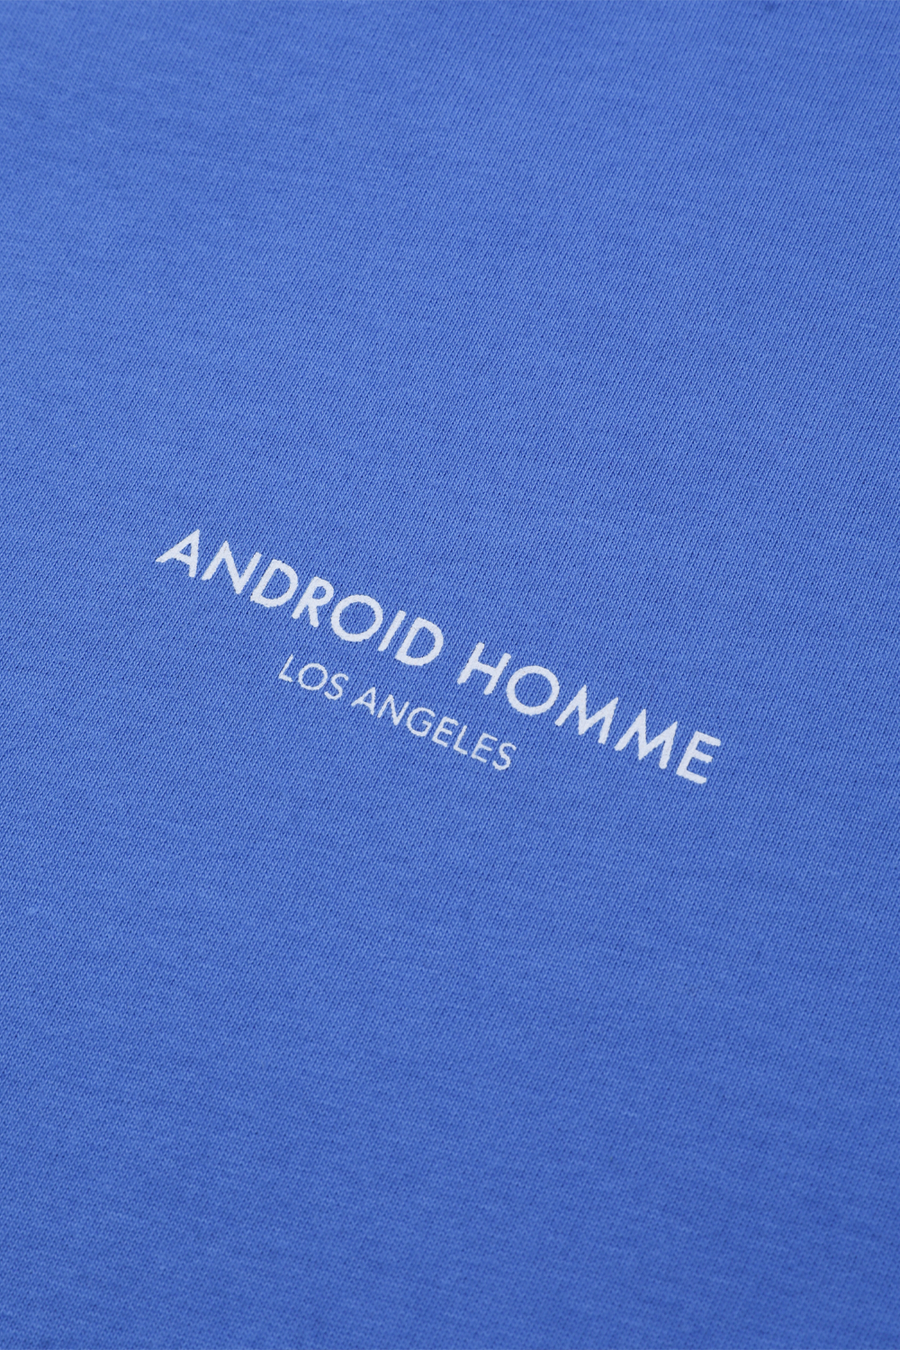 Buy the Android Homme Run Division T-Shirt in Blue at Intro. Spend £50 for free UK delivery. Official stockists. We ship worldwide.